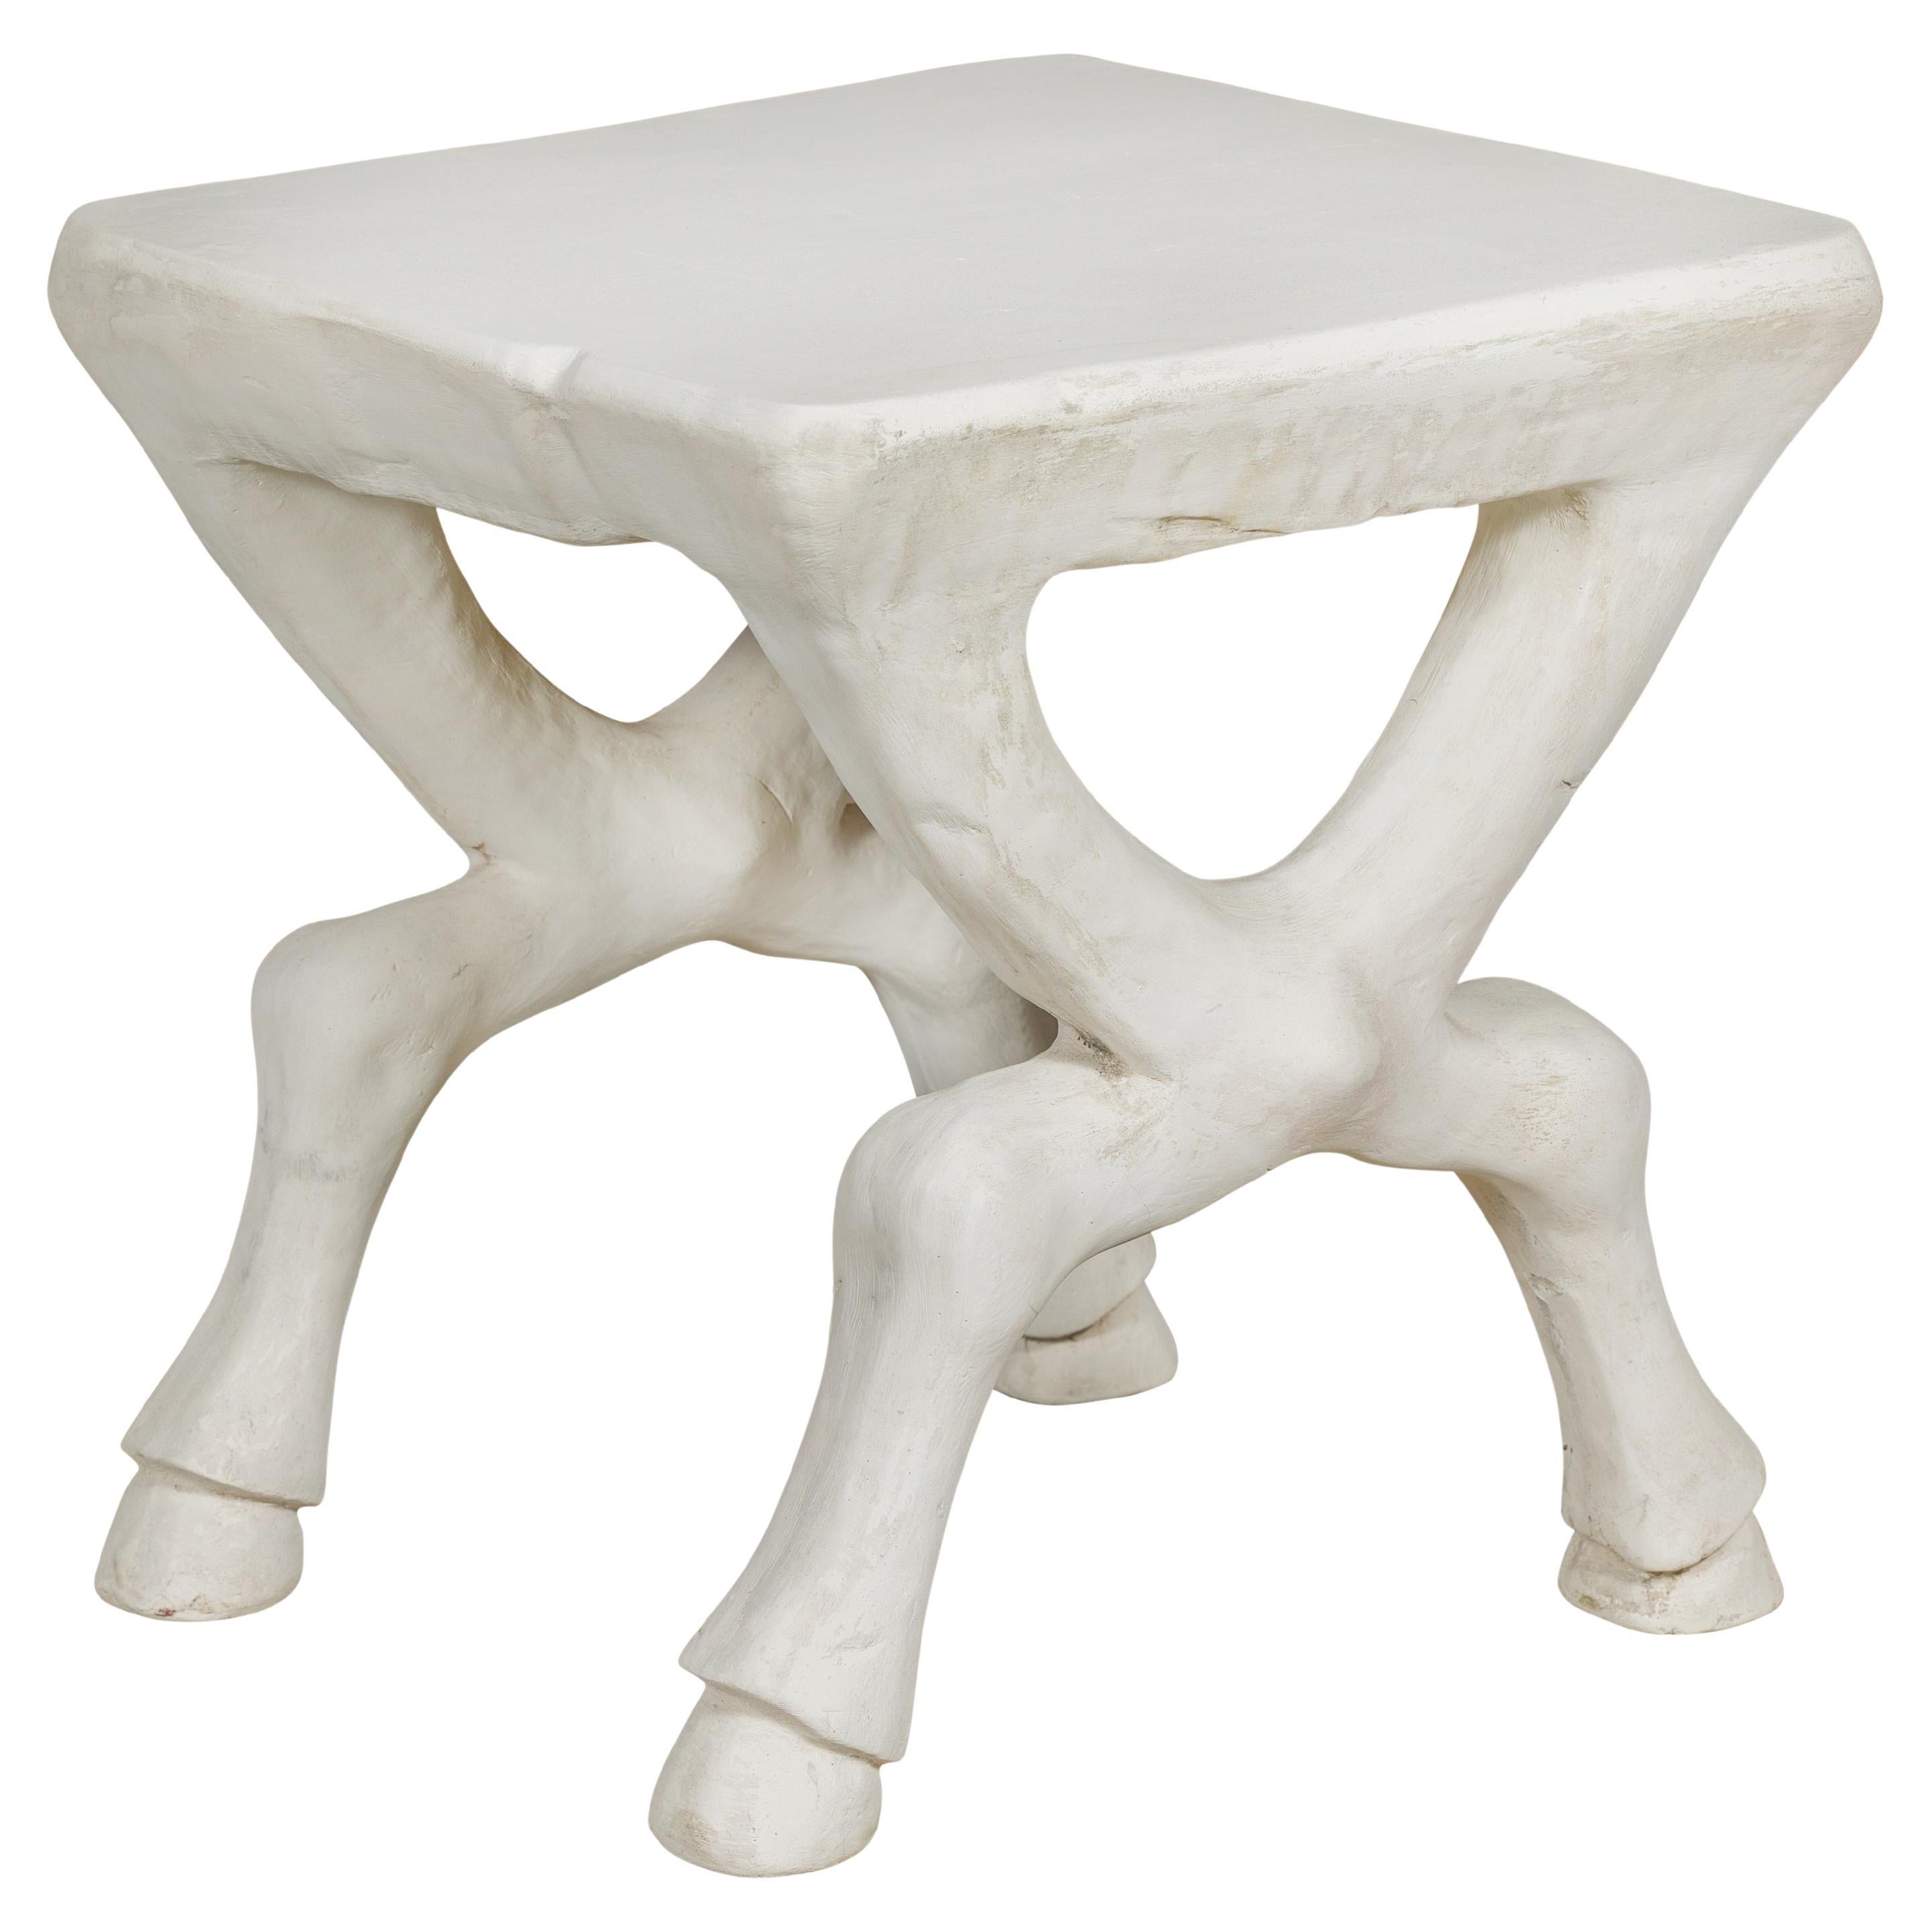 Signed John Dickinson 1970s White Plaster Low Side Table with Hoofed Feet